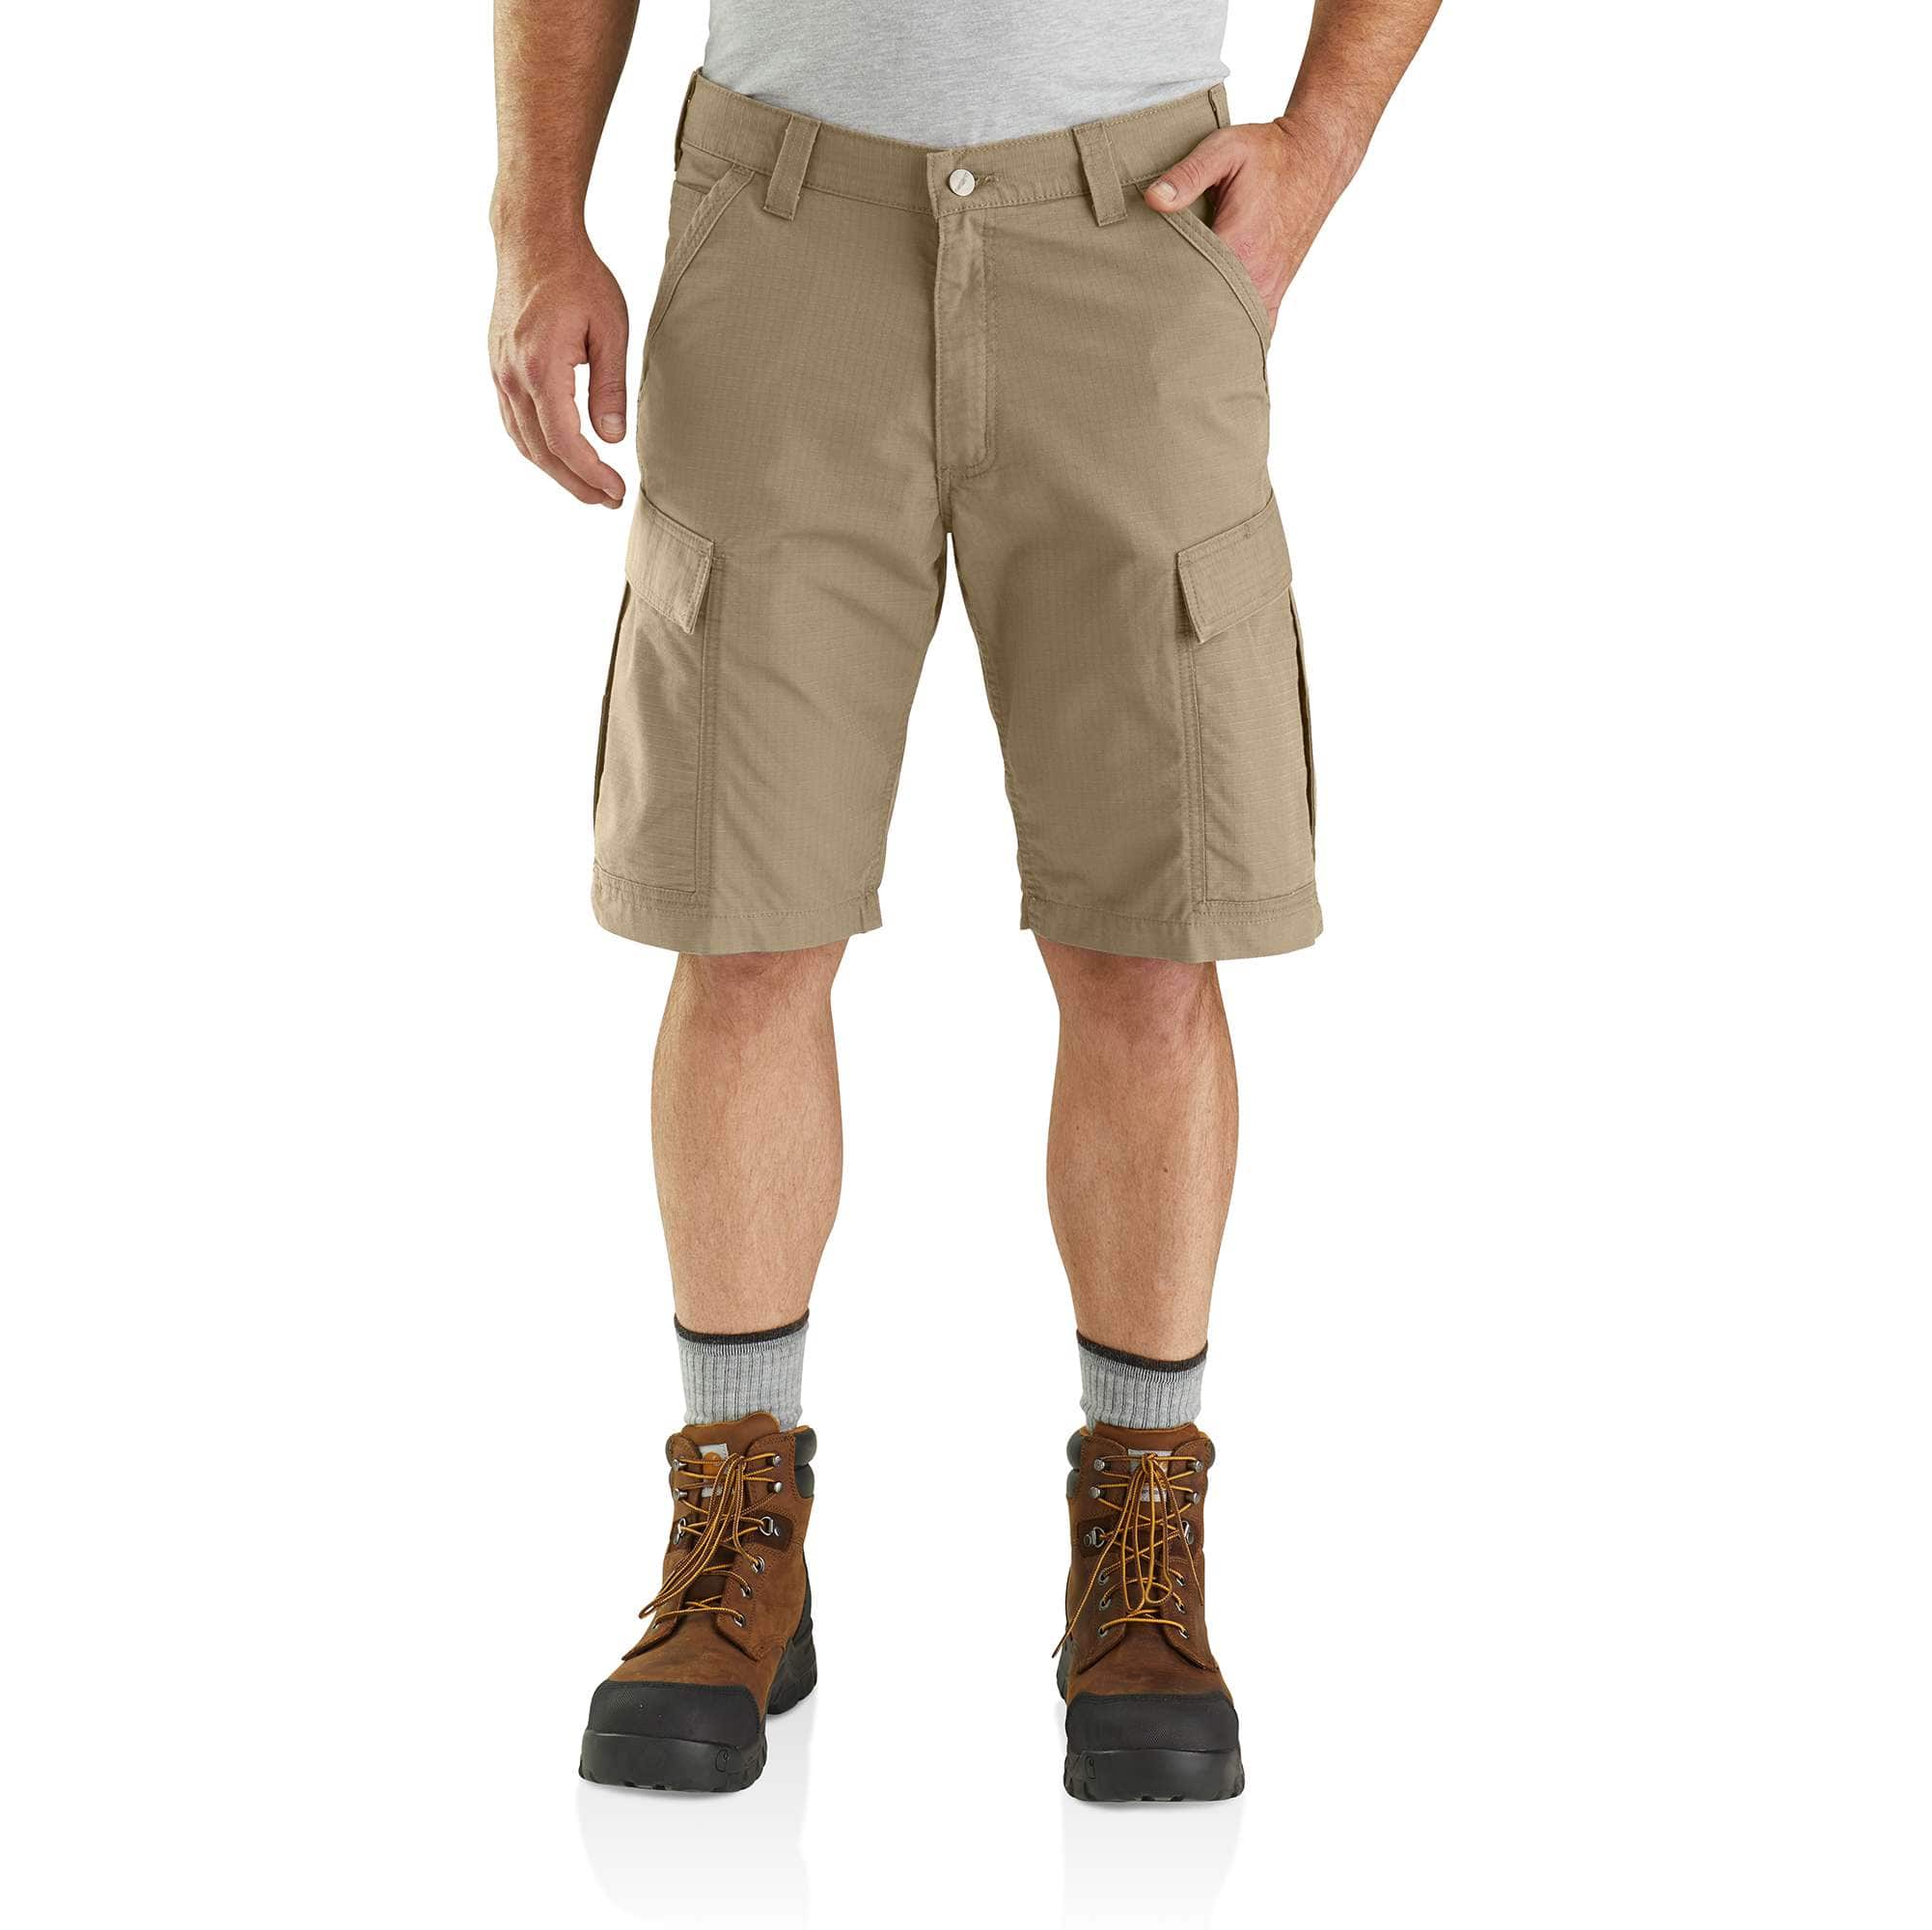 Force Relaxed Fit Ripstop Cargo Work Short, Men's Best Sellers